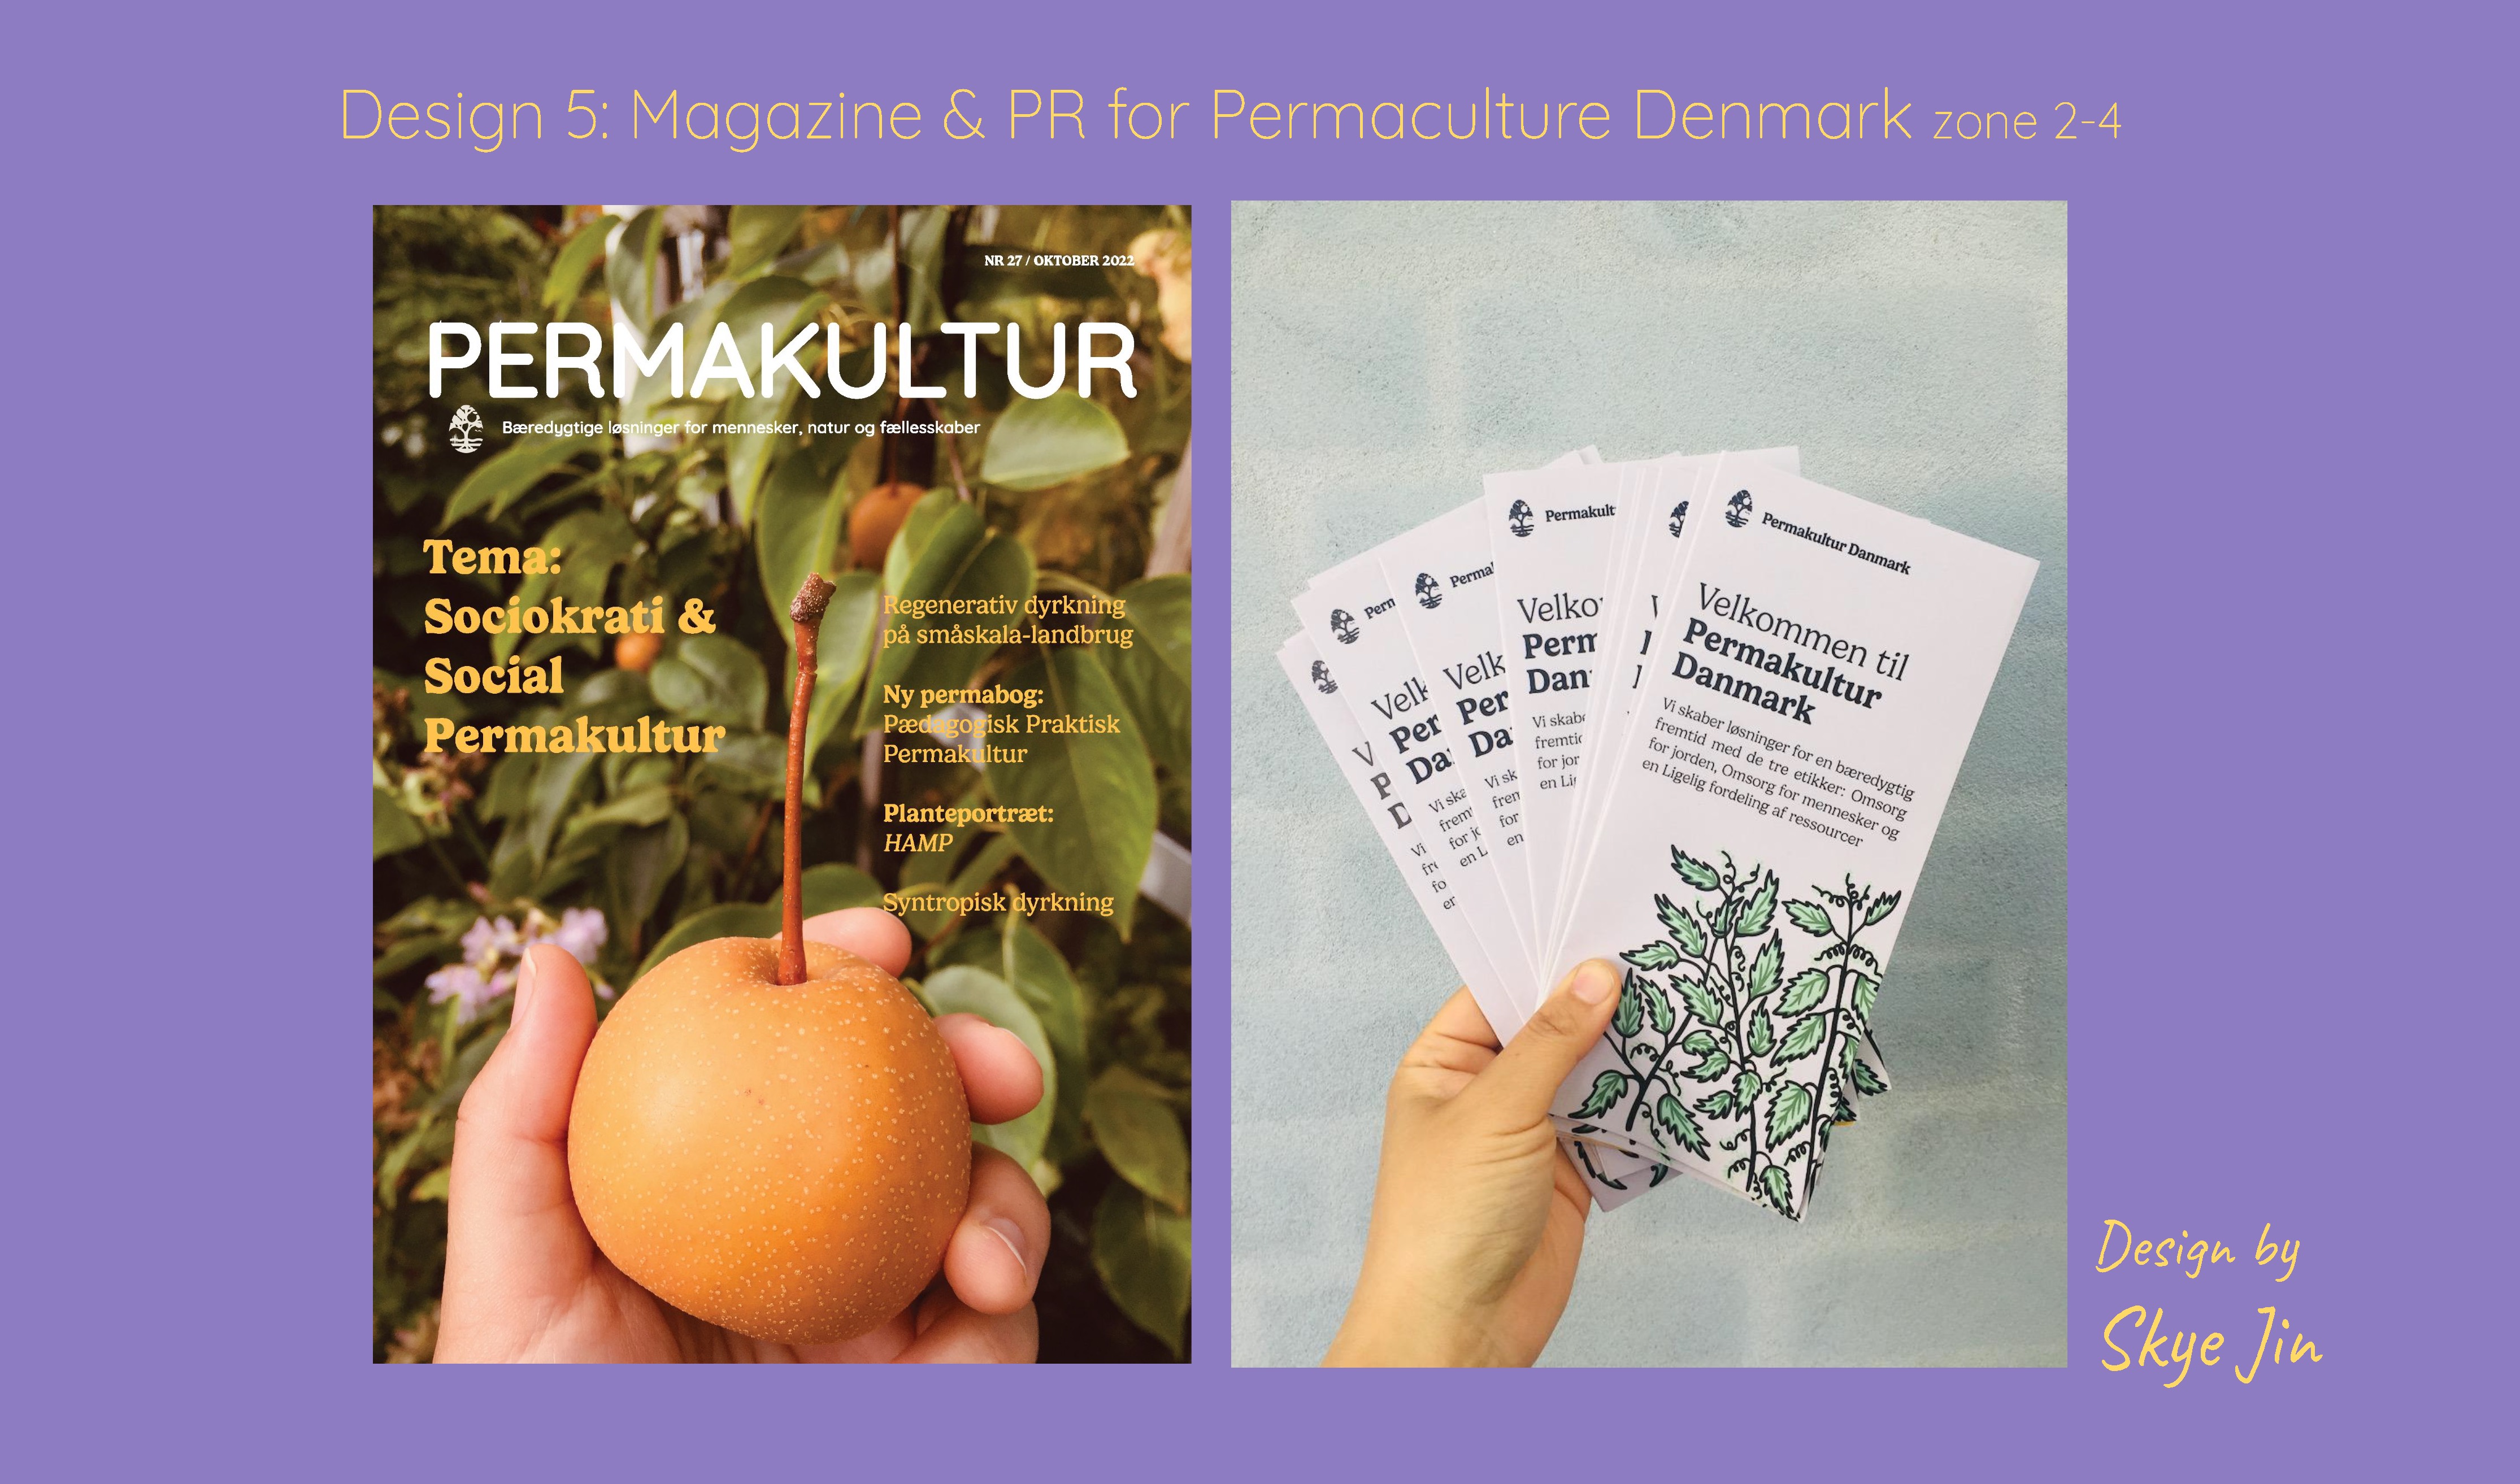 Design 5: Magazine & Visual PR for Permaculture Denmark by Skye Jin